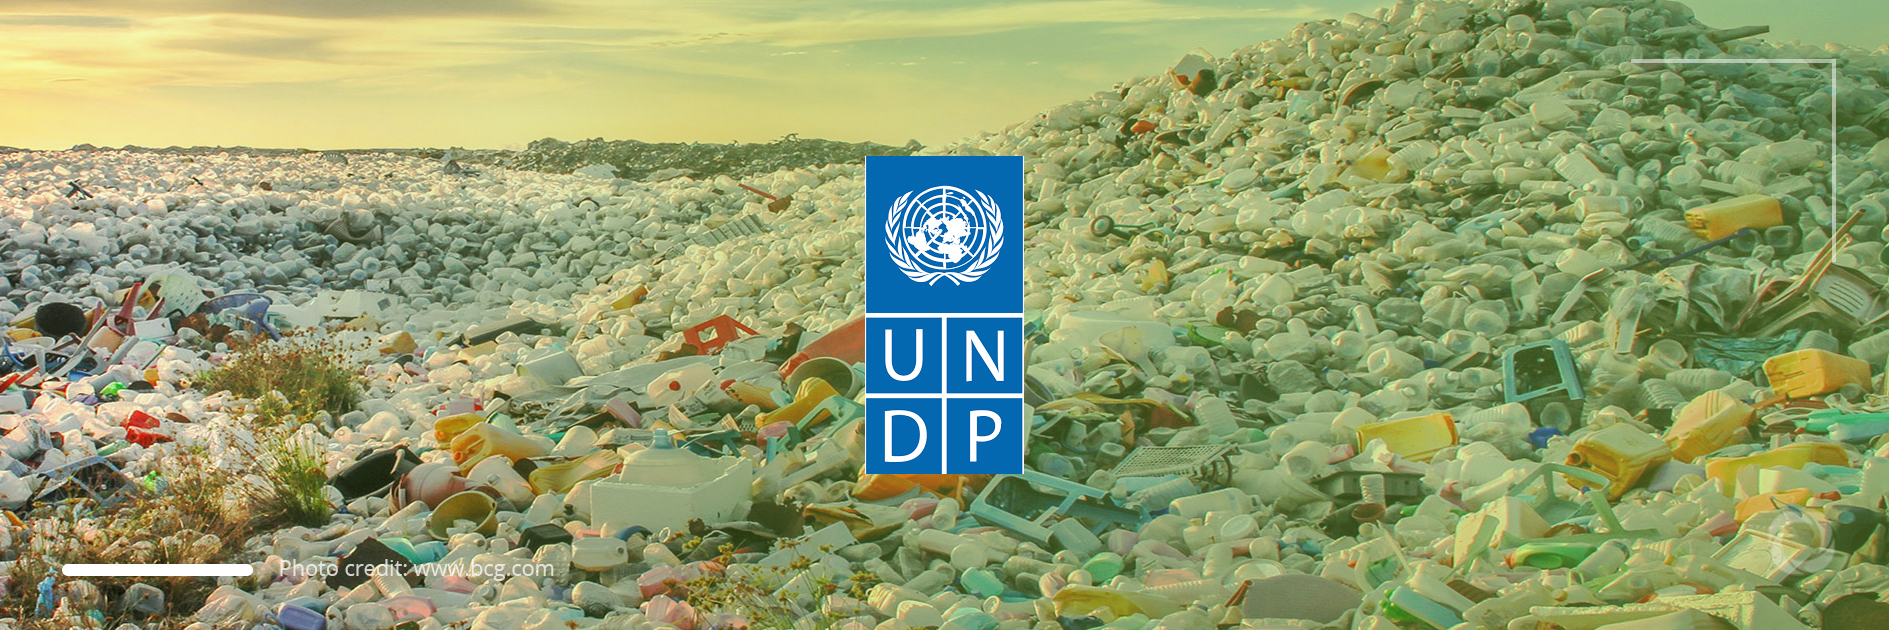 Nepal's waste management system to be upgraded with UNDP's support